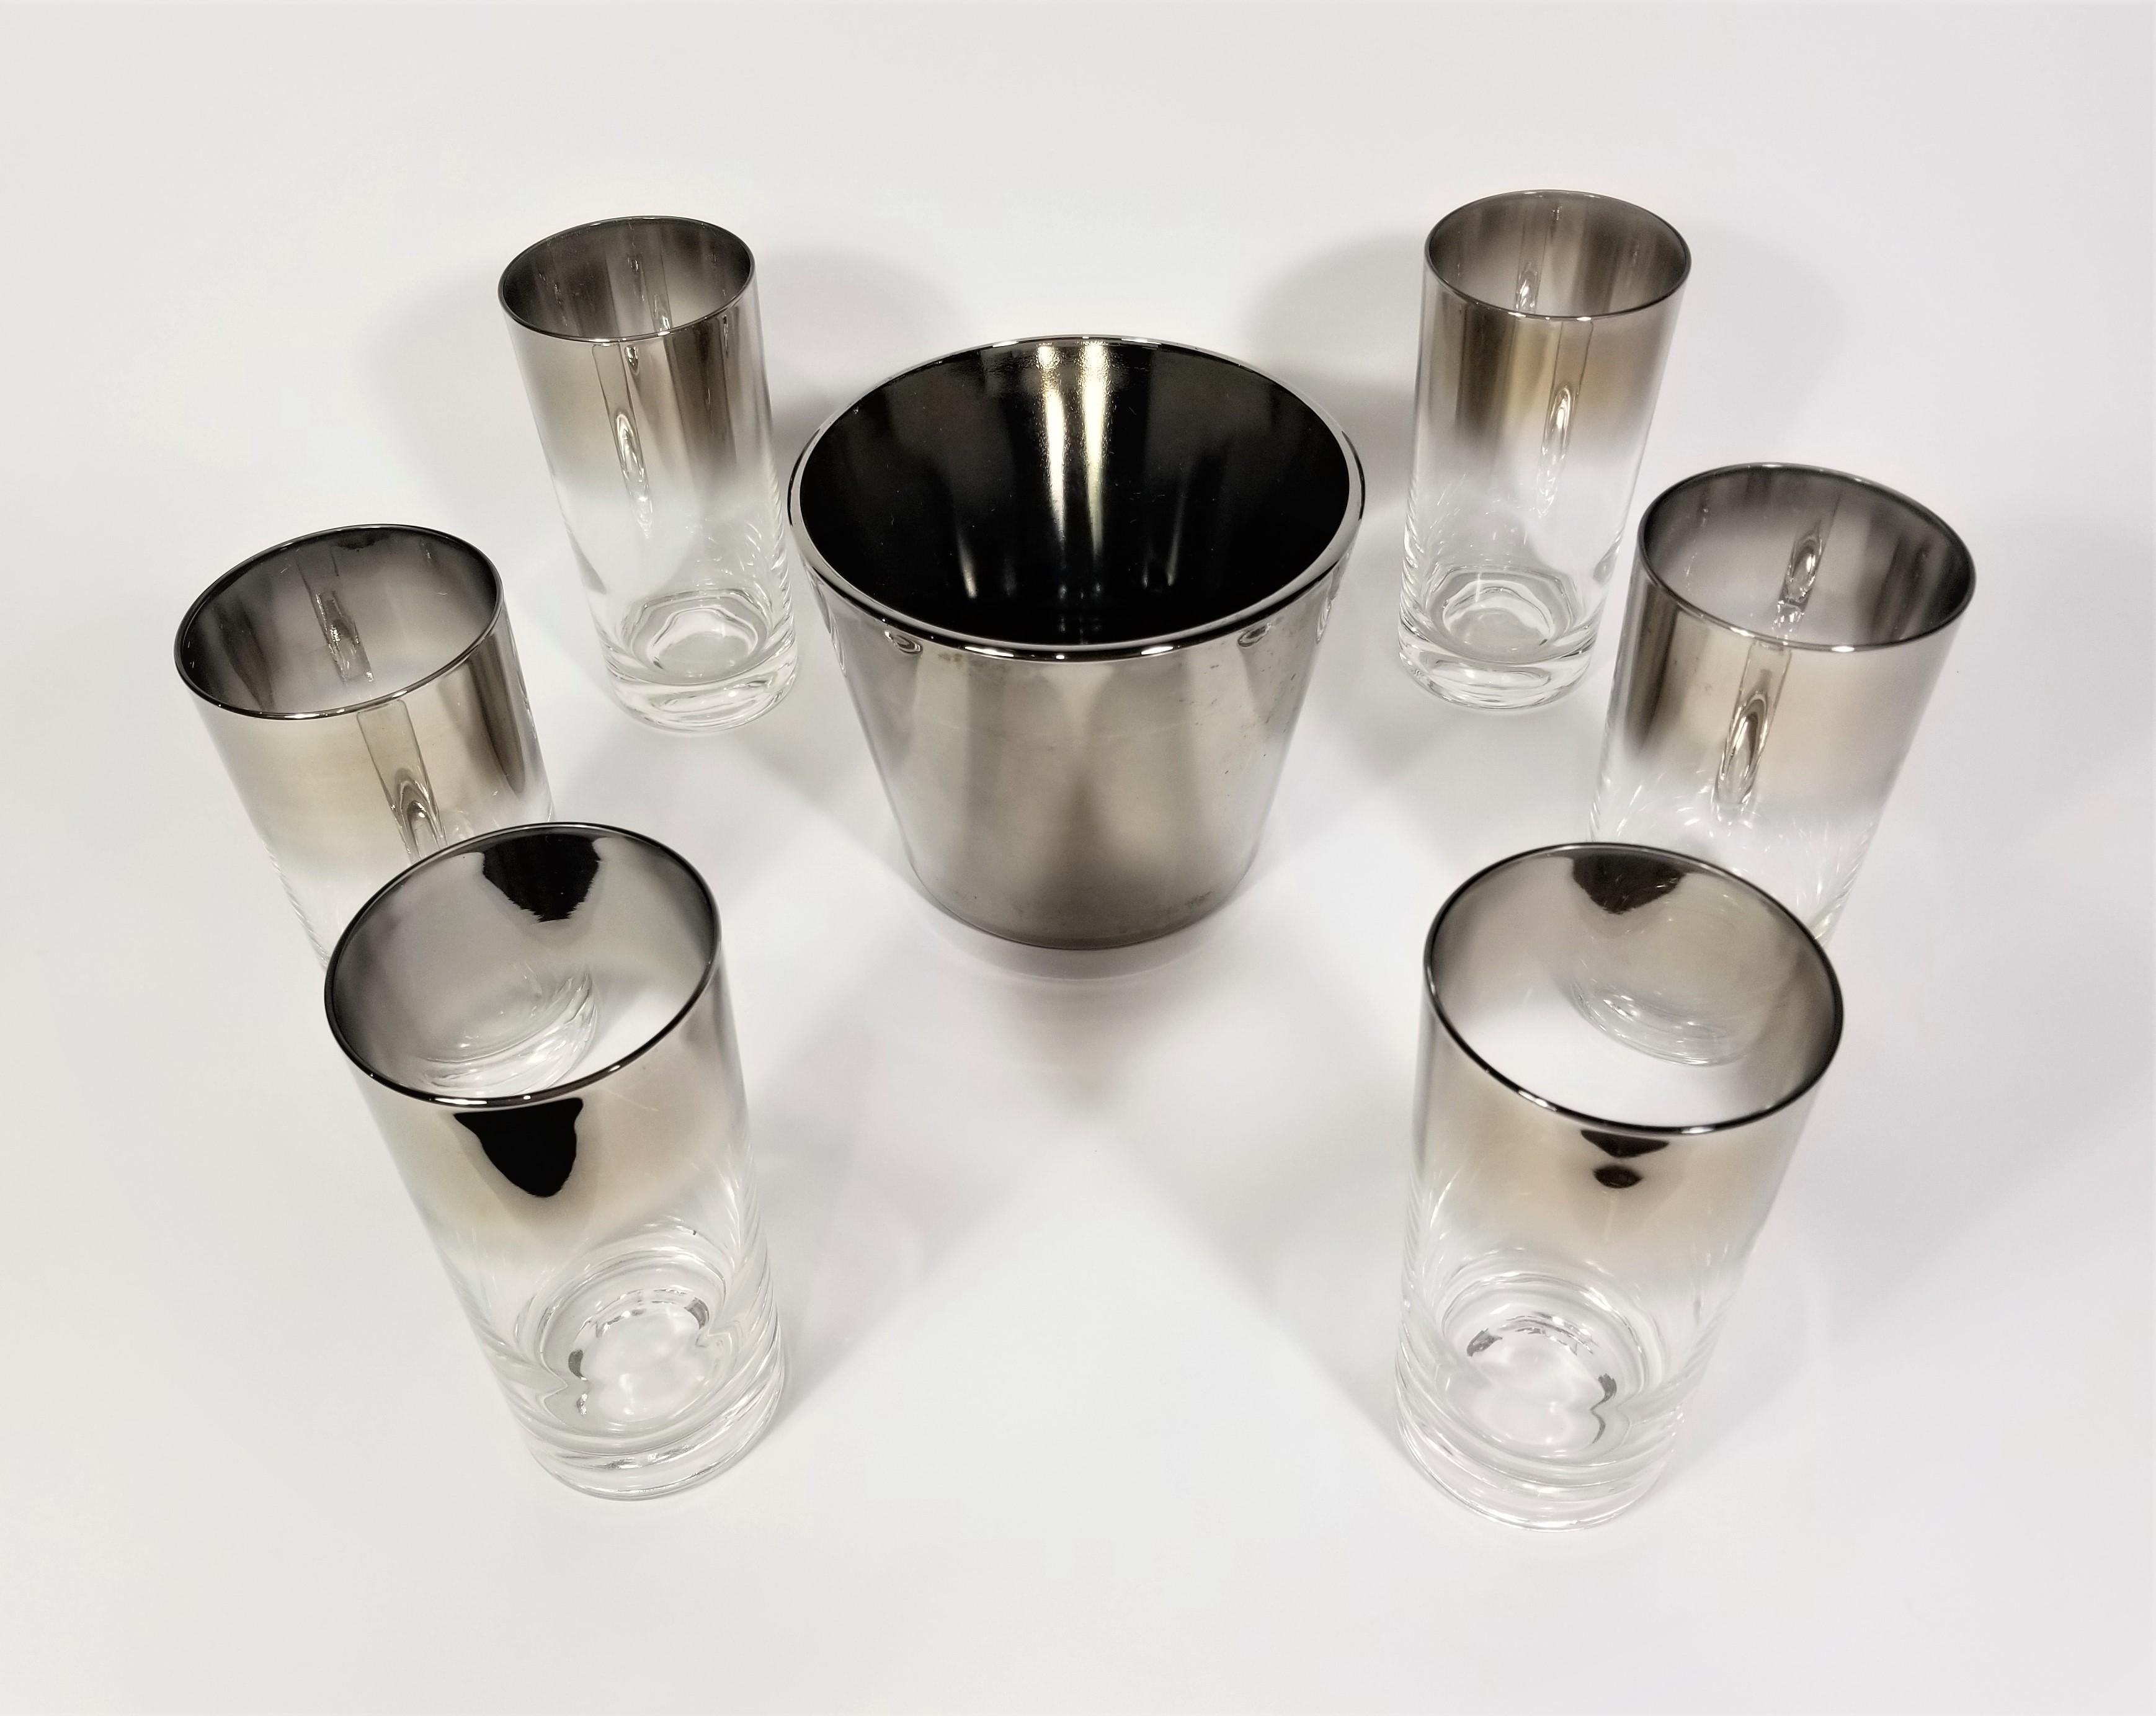 Mid. Century 1960s Dorothy Thorpe silver fade glassware barware. Set includes 6 glasses and 1 ice bucket. 

Measurements:
Ice Bucket Height: 4.63 inches
Ice Bucket Diameter: 5.75 inches

Glass Height: 5.63 inches
Glass Diameter: 2.75 inches.